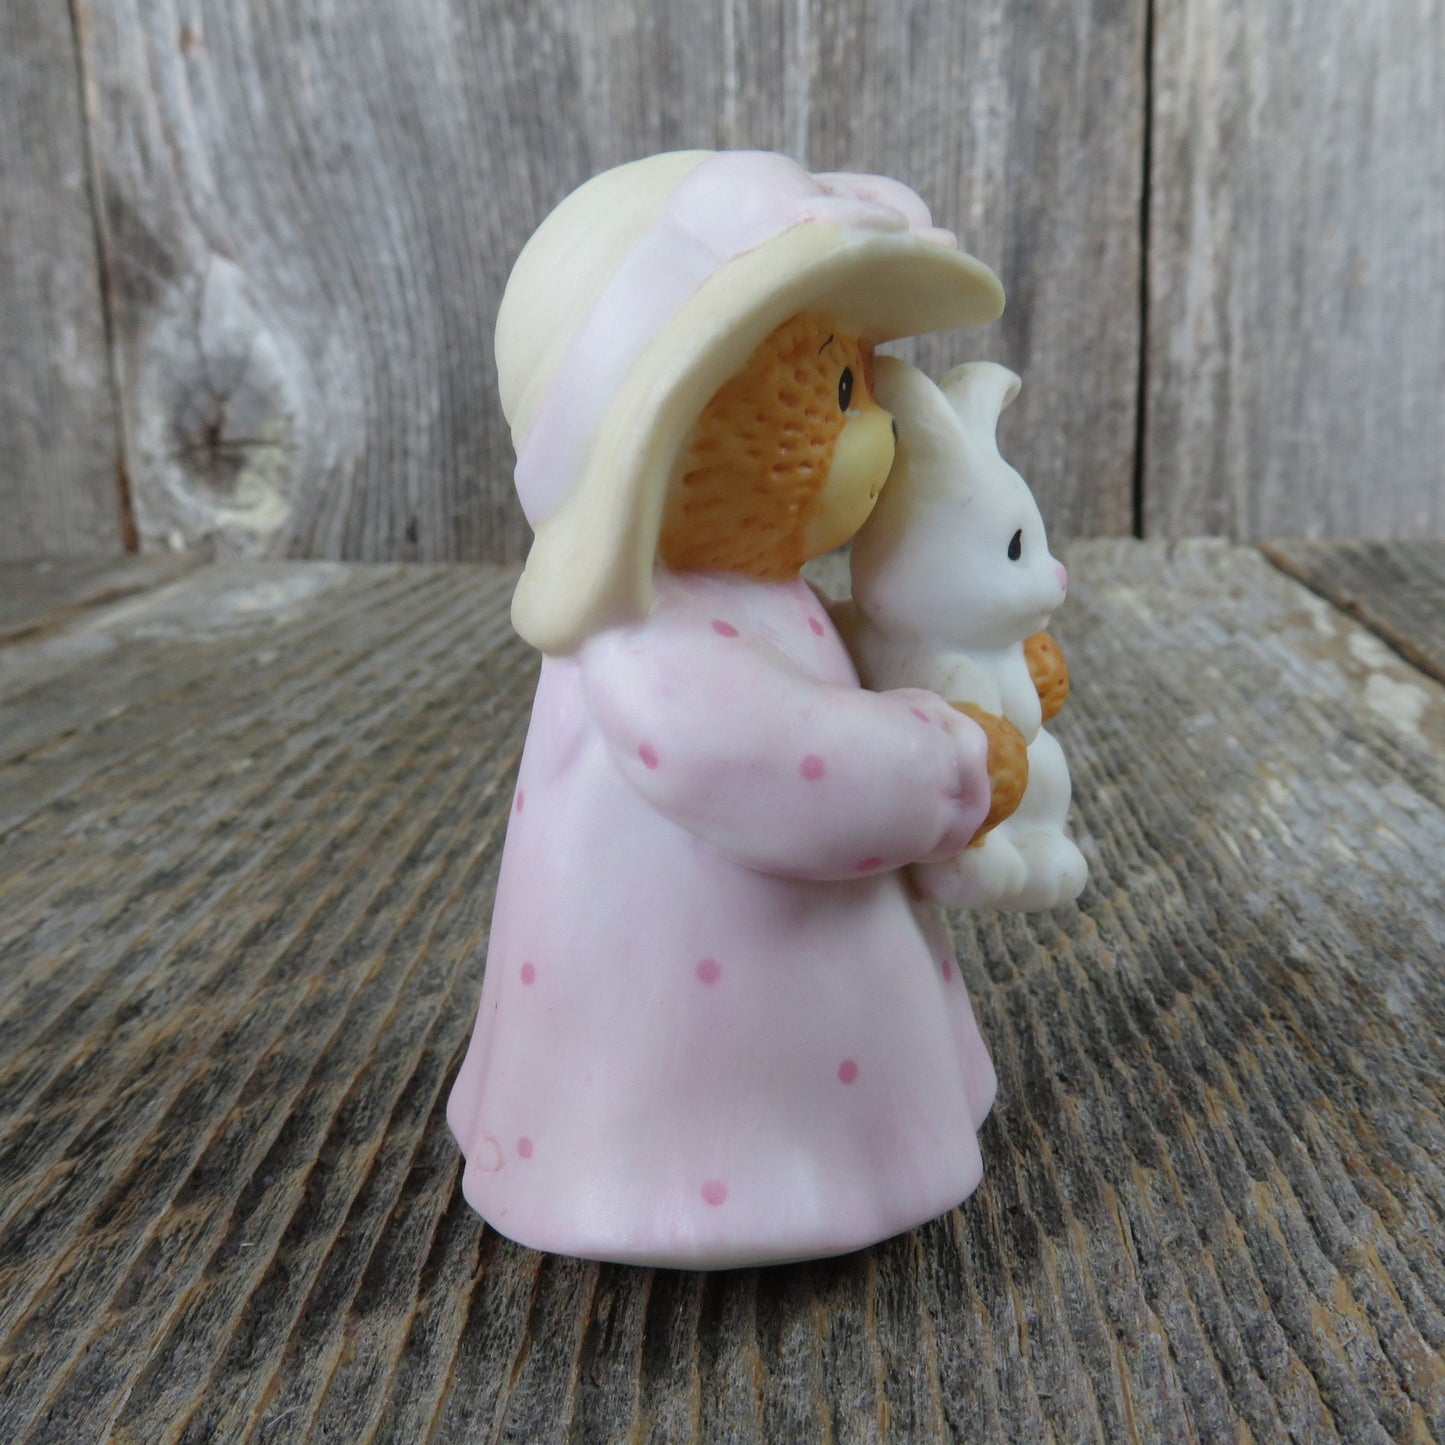 Bear in Big Hat Holding A Bunny Figurine Girl Easter Dress Lucy Rigg Enesco Vintage 1987 Taiwan